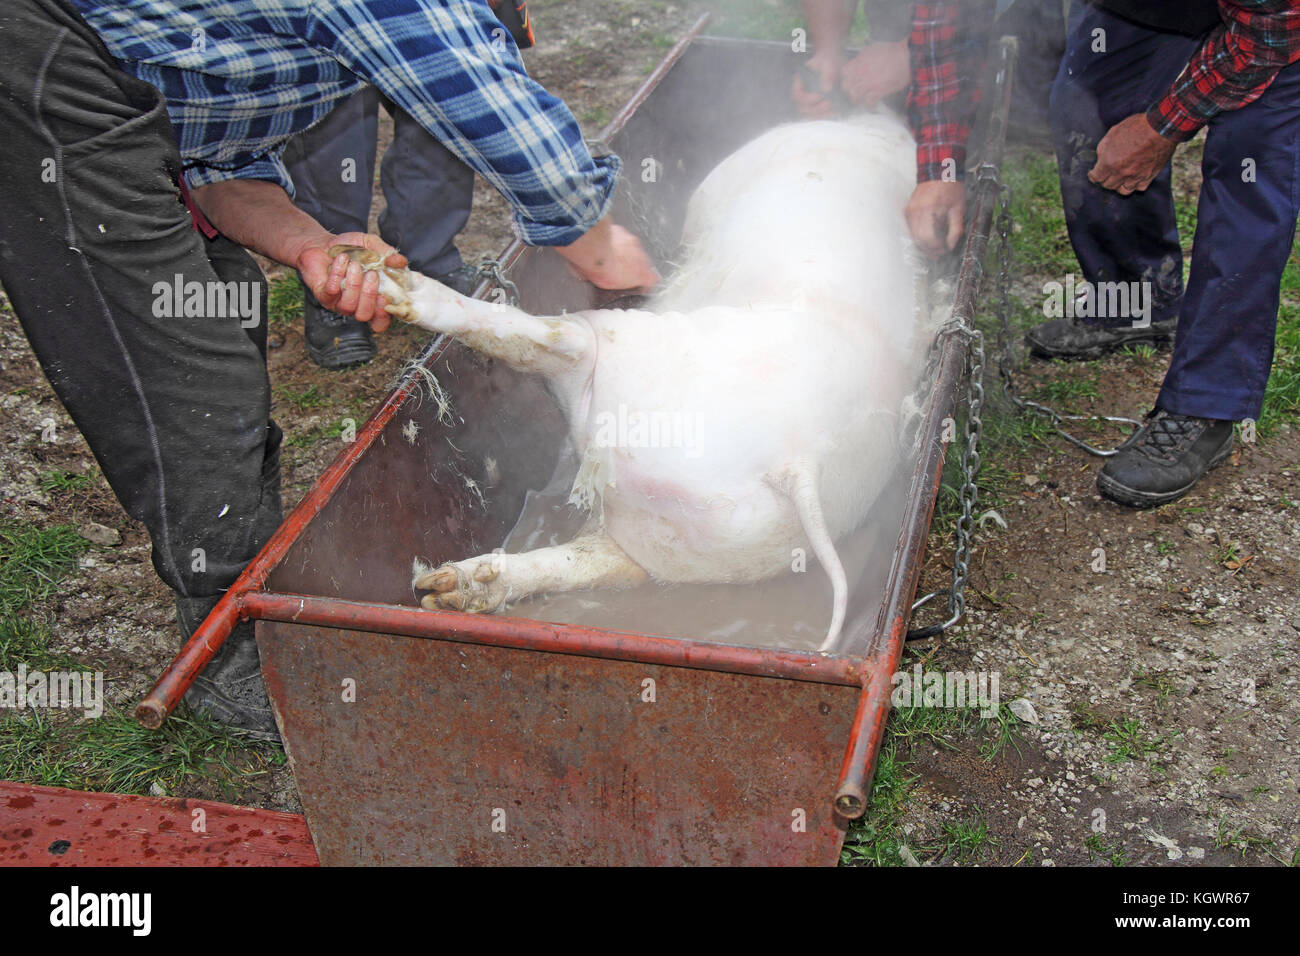 Traditional home made pig slaughtering in rural Stock Photo